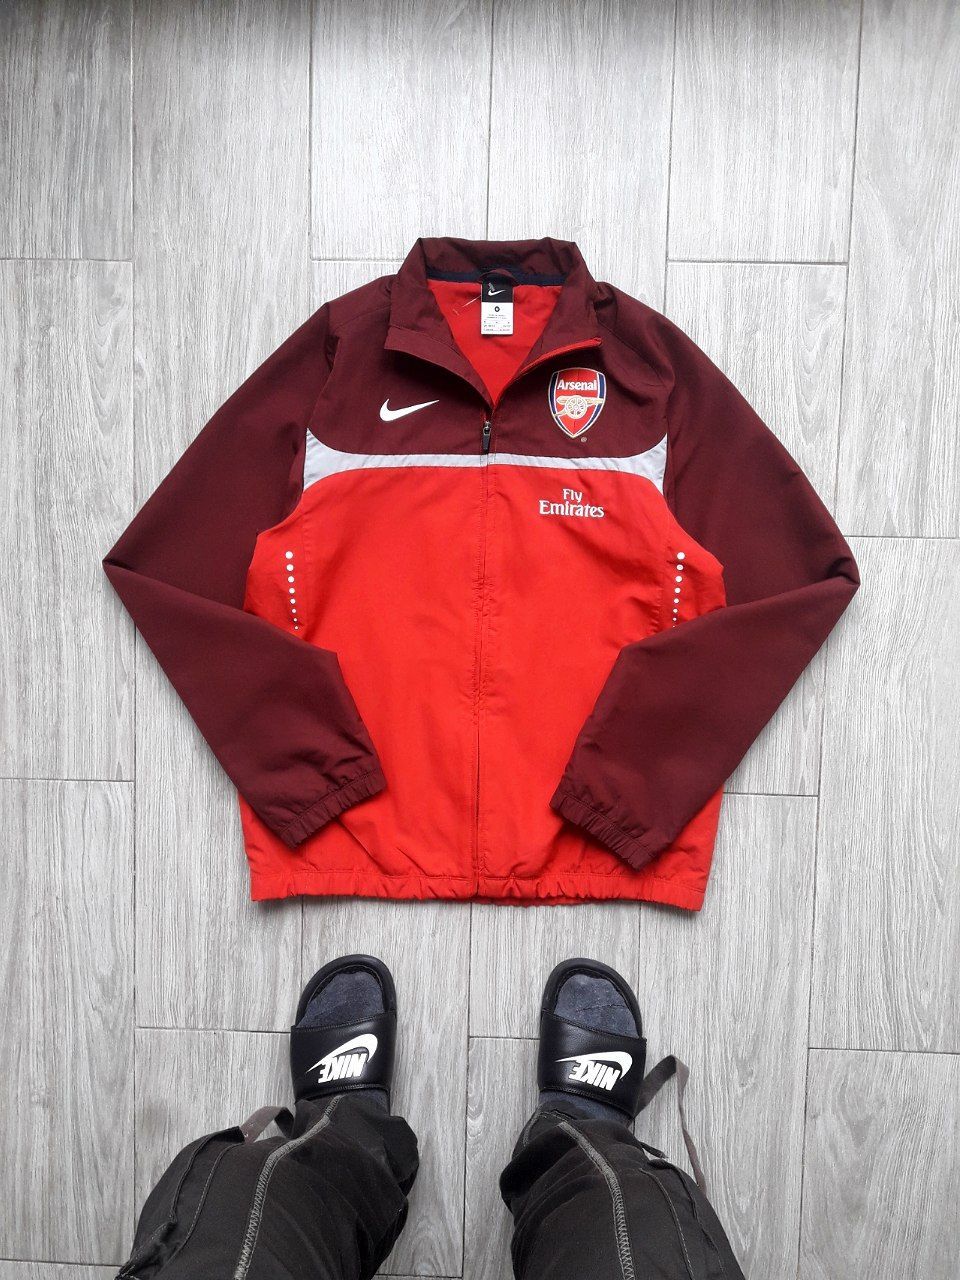 Pre-owned Nike X Soccer Jersey Nike Arsenal 2010/11 Fly Emirates Training Track Top Jacket In Red